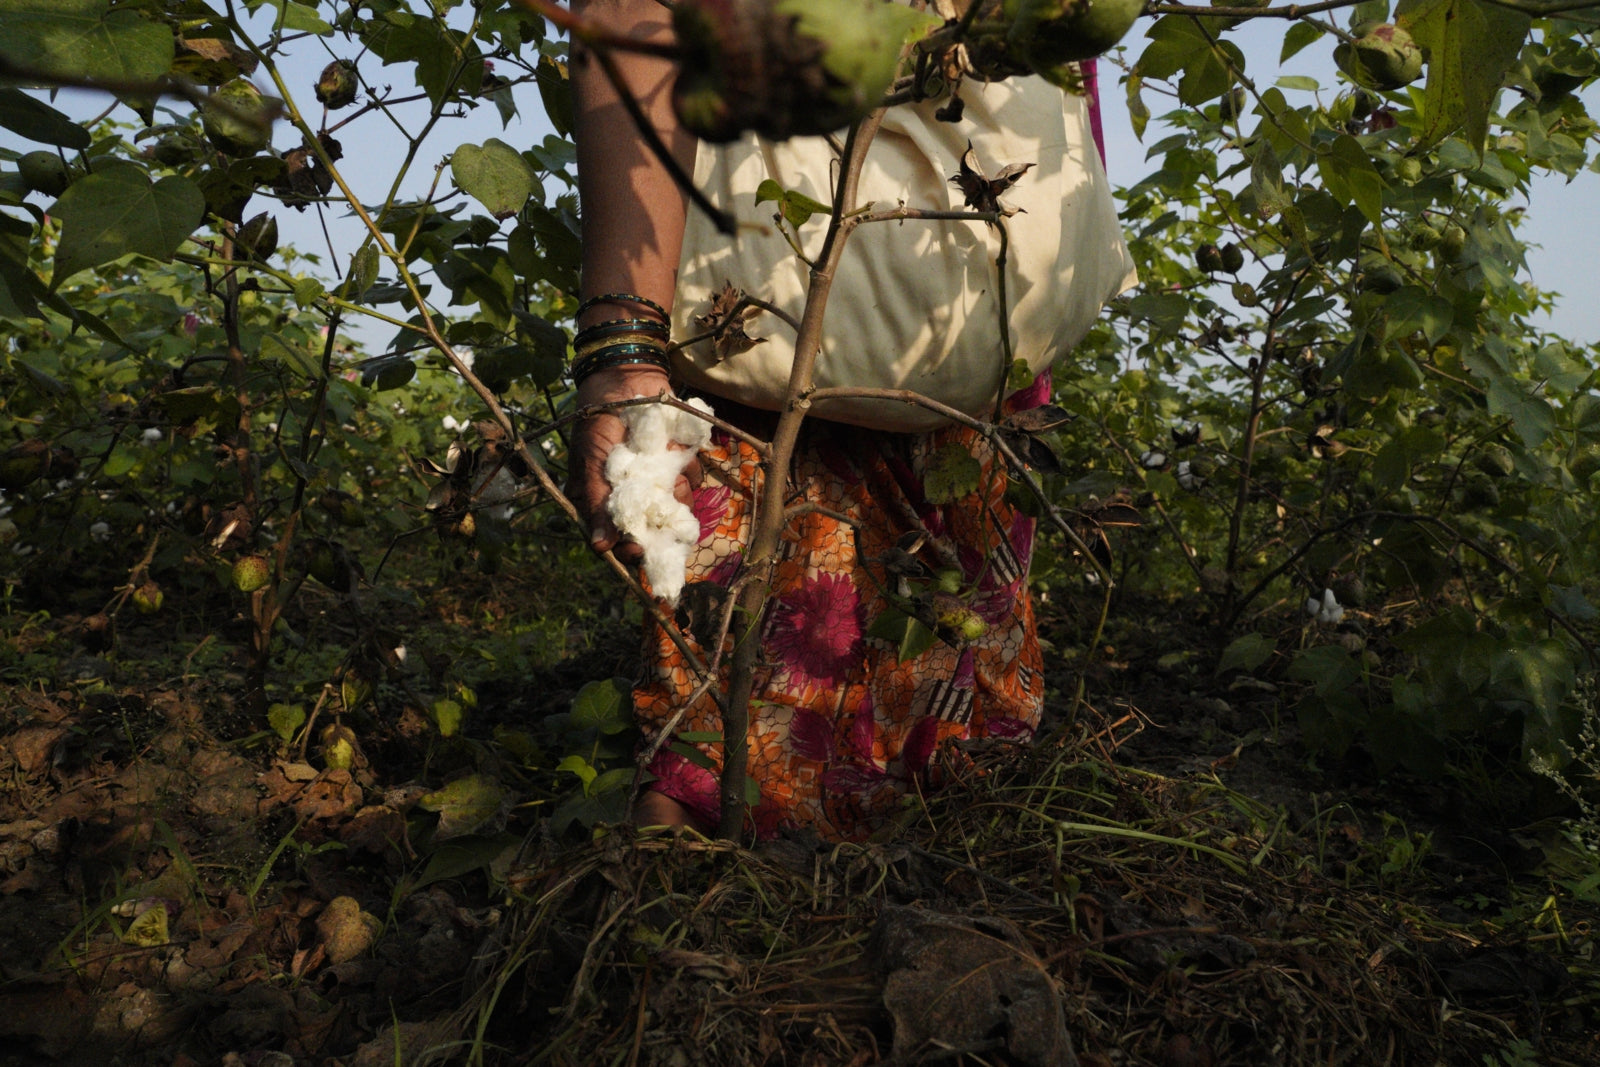 When it is ready for harvest, cotton is handpicked from its protective case, called a boll. Photo: Avani Rai.